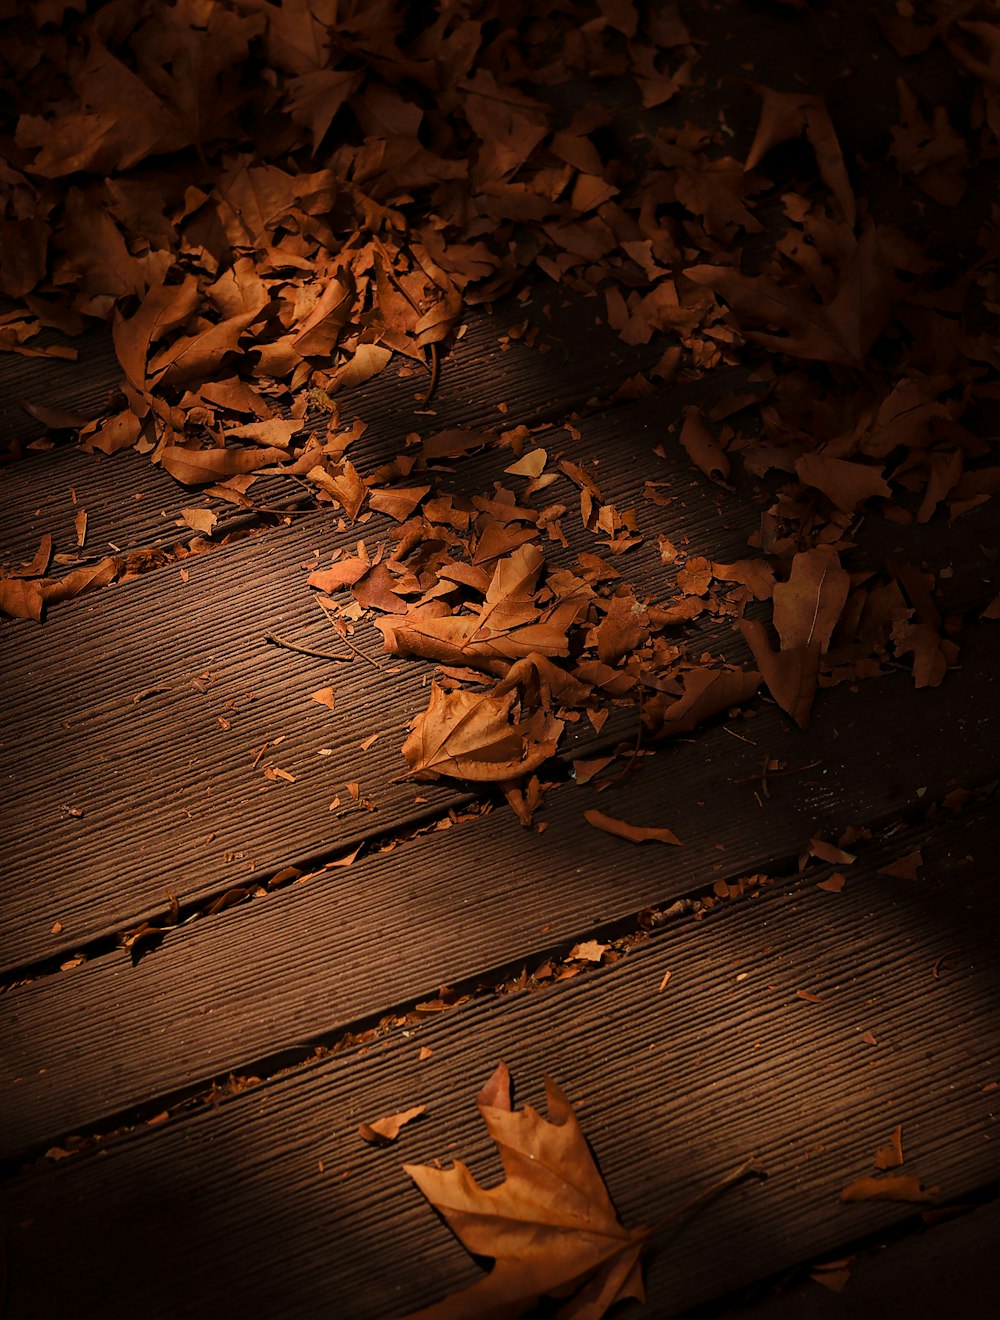 a close up of leaves on a wooden floor